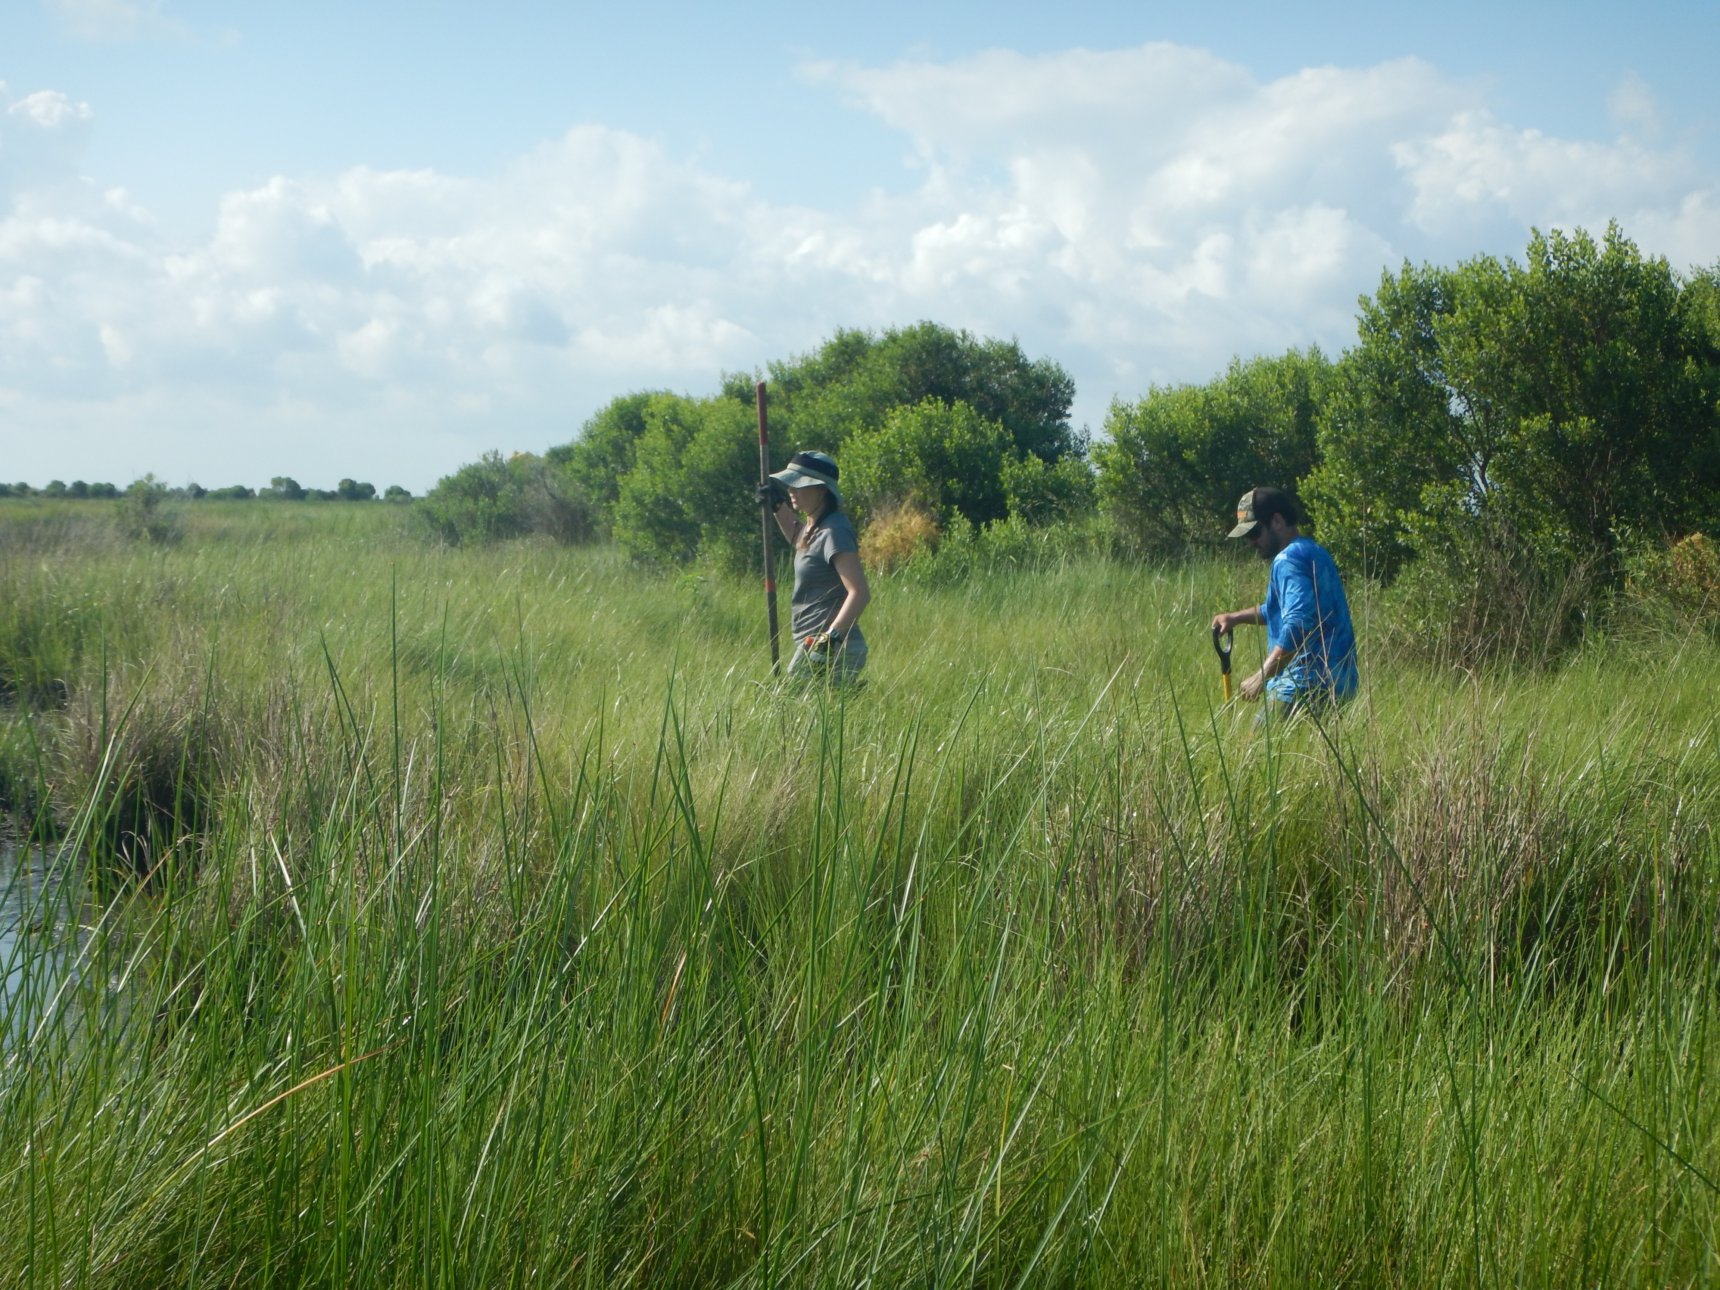 Man and woman with shovels walk through a green, grassy wetland with blue skies in the background.